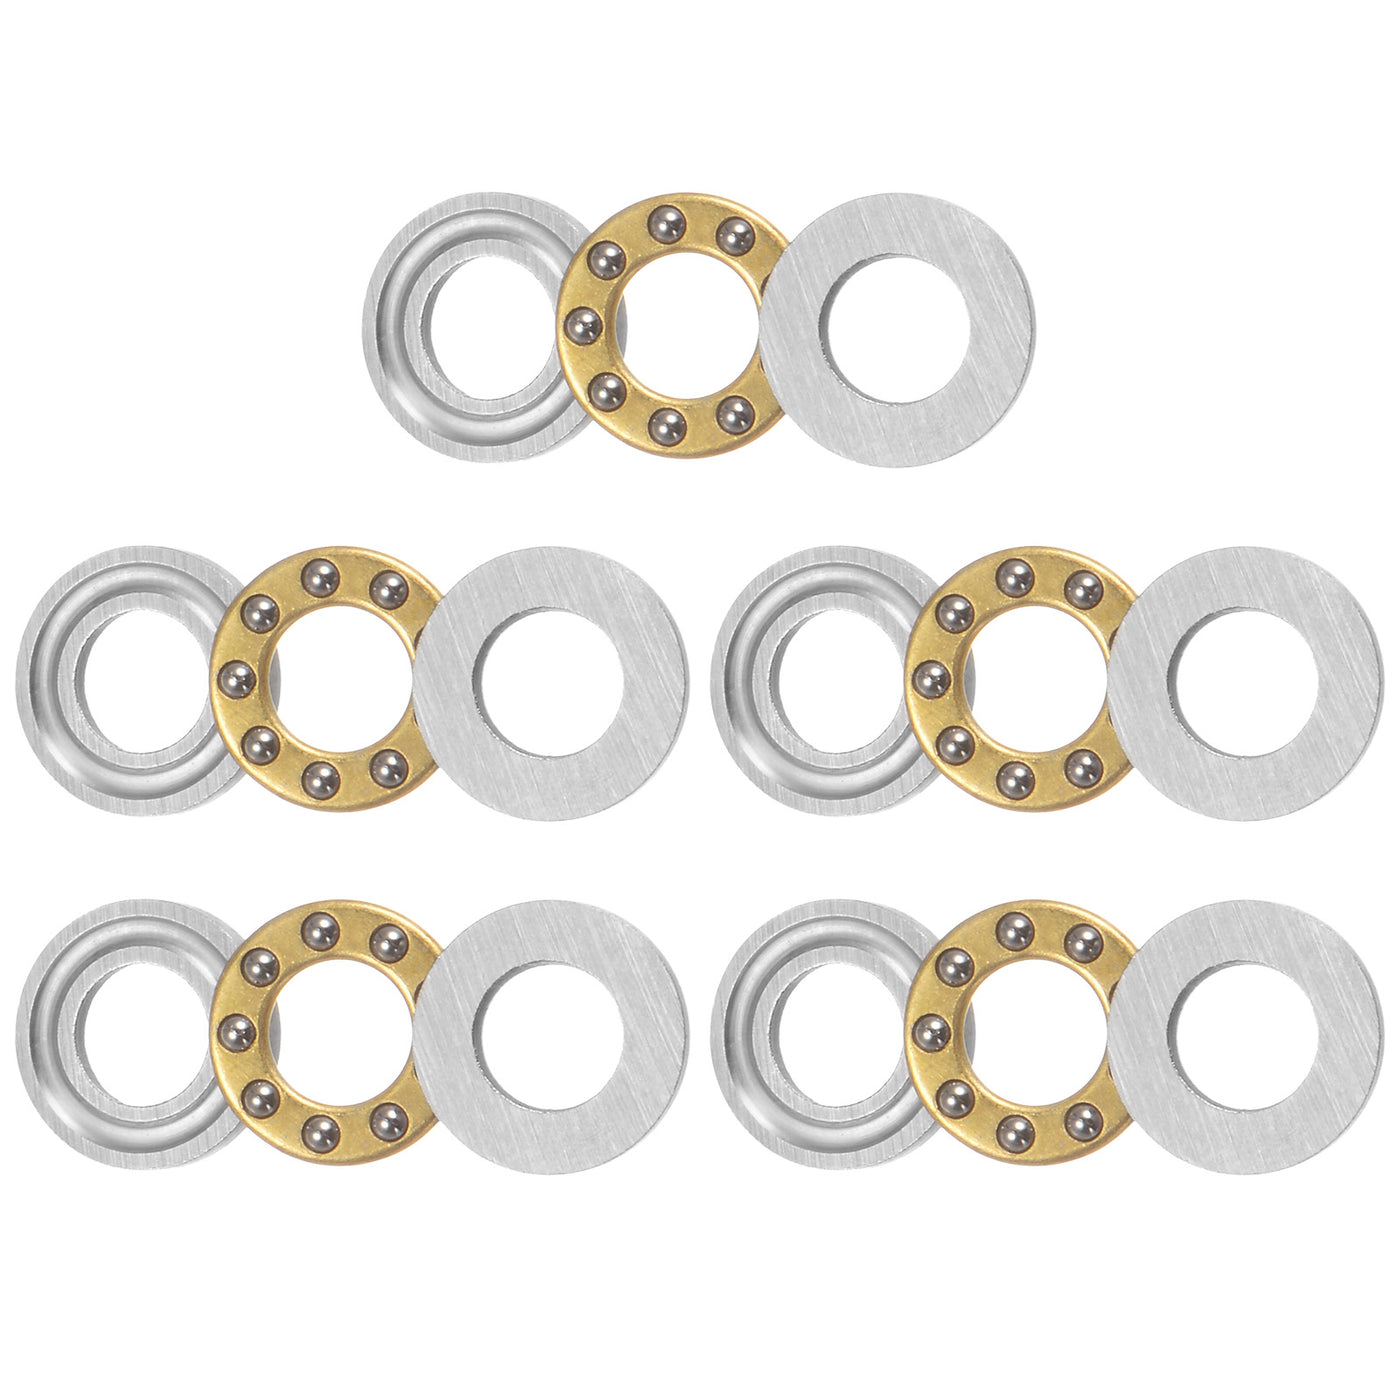 uxcell Uxcell F5-10M Thrust Ball Bearing 5x10x4mm Brass with Washers 5pcs